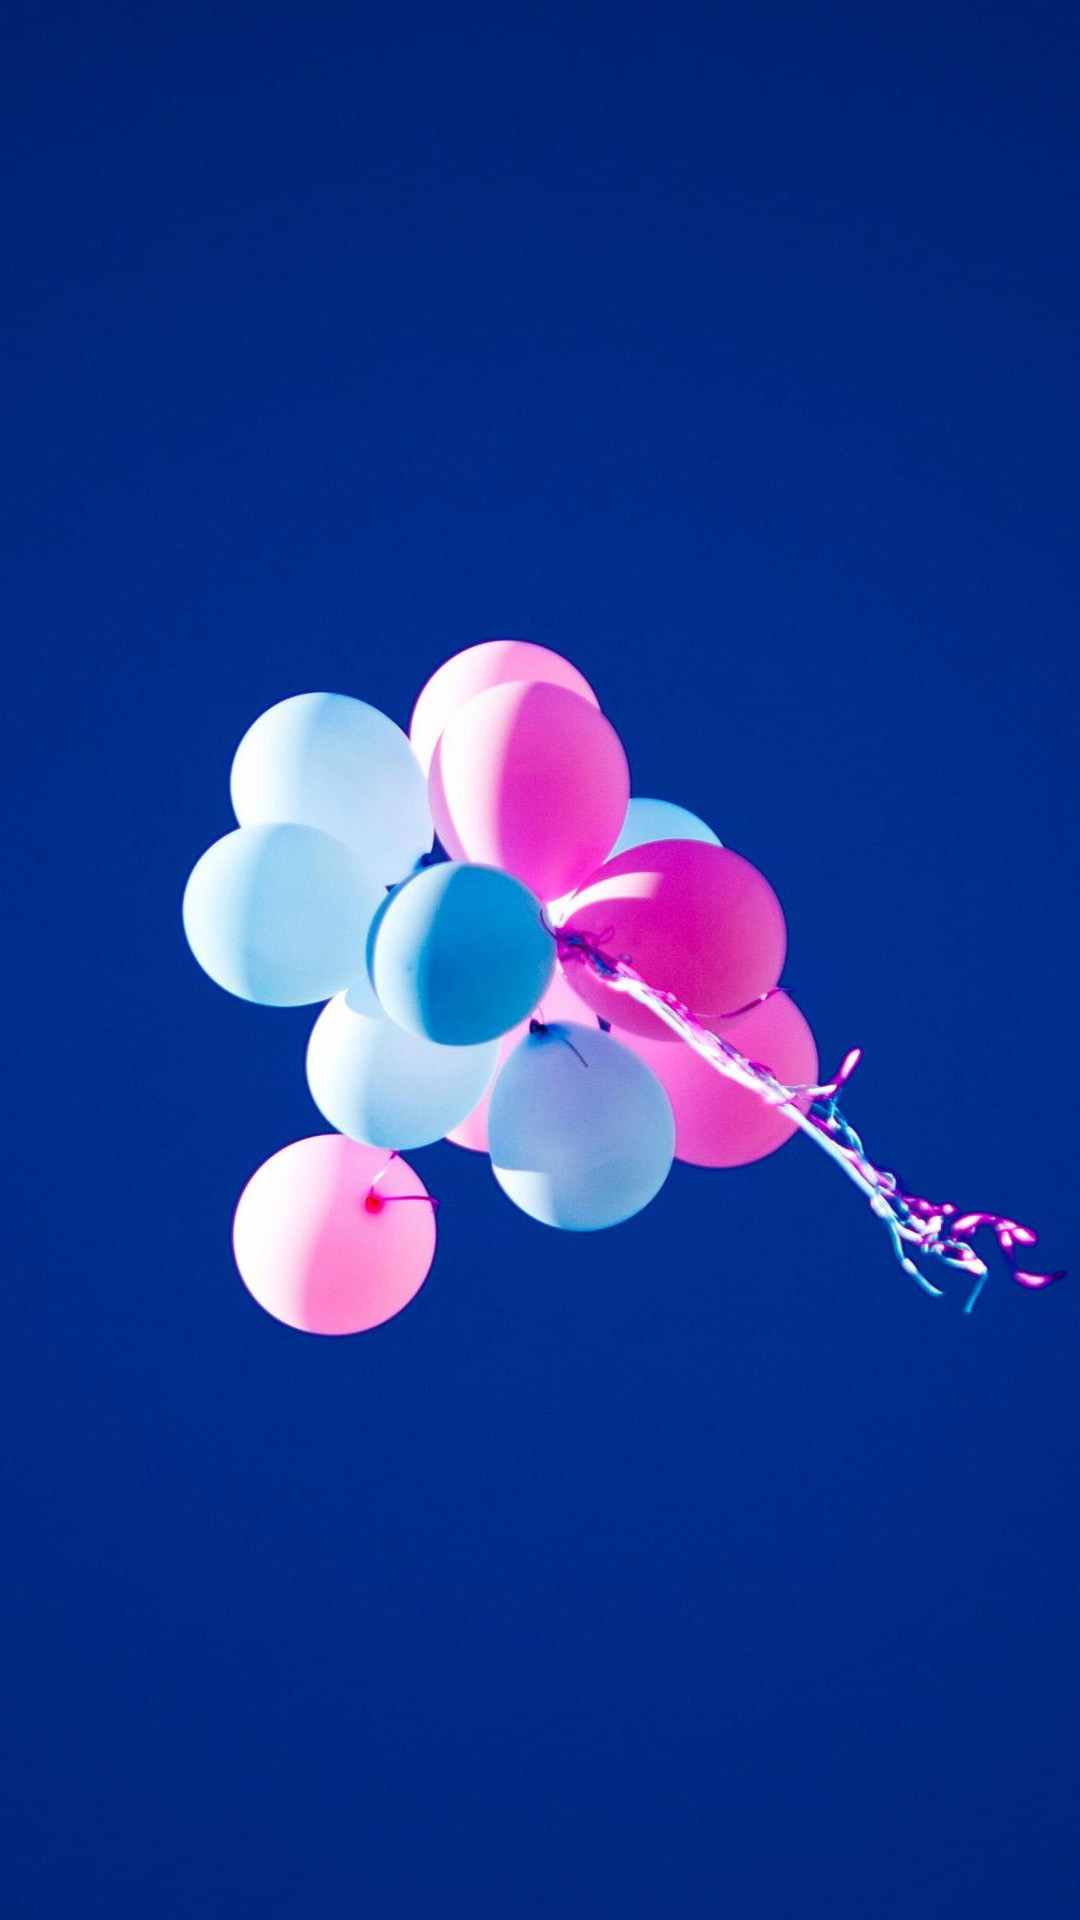 wallpaper hd download for android mobile,blue,balloon,pink,sky,magenta